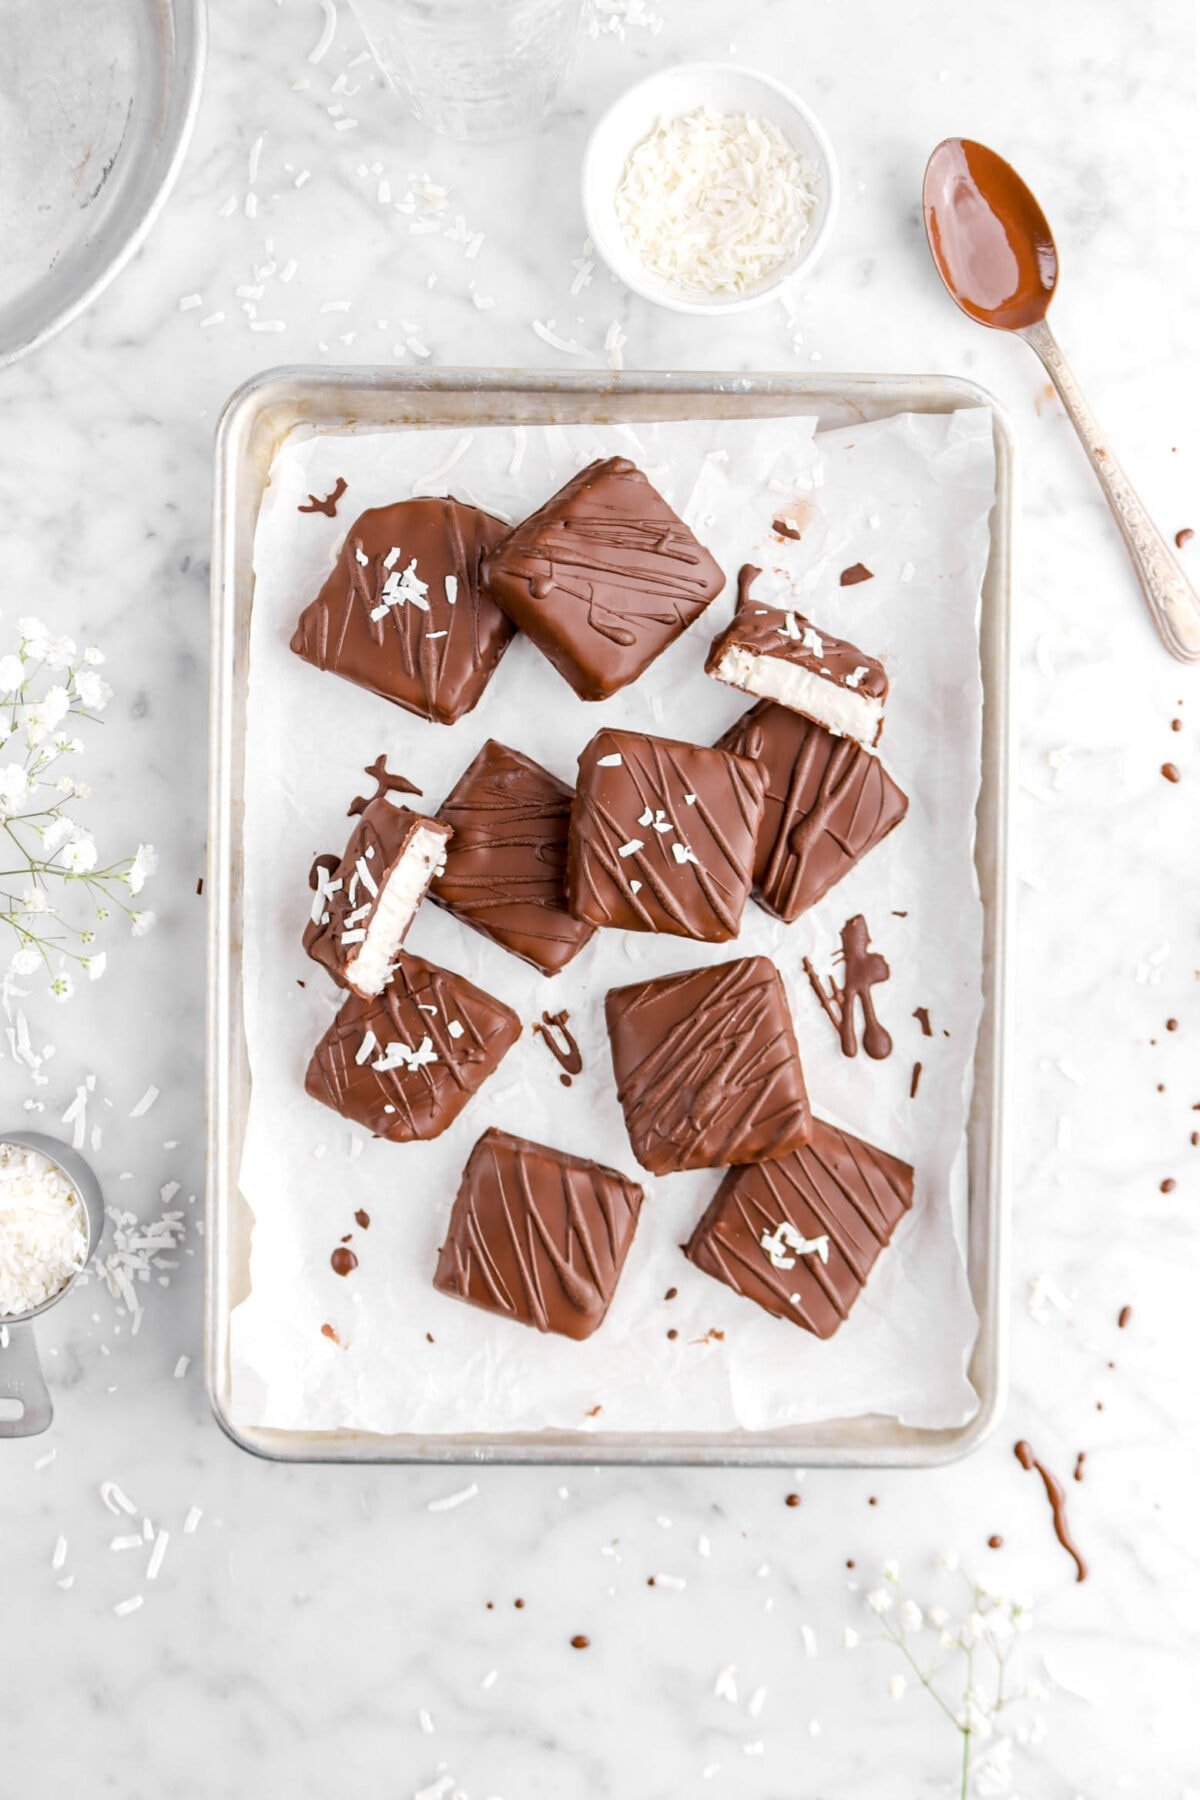 overhead shot of ten coconut filled chocolates with one cut in half, bowls of flaked coconut around, and spoonful of melted chocolate on marble surface